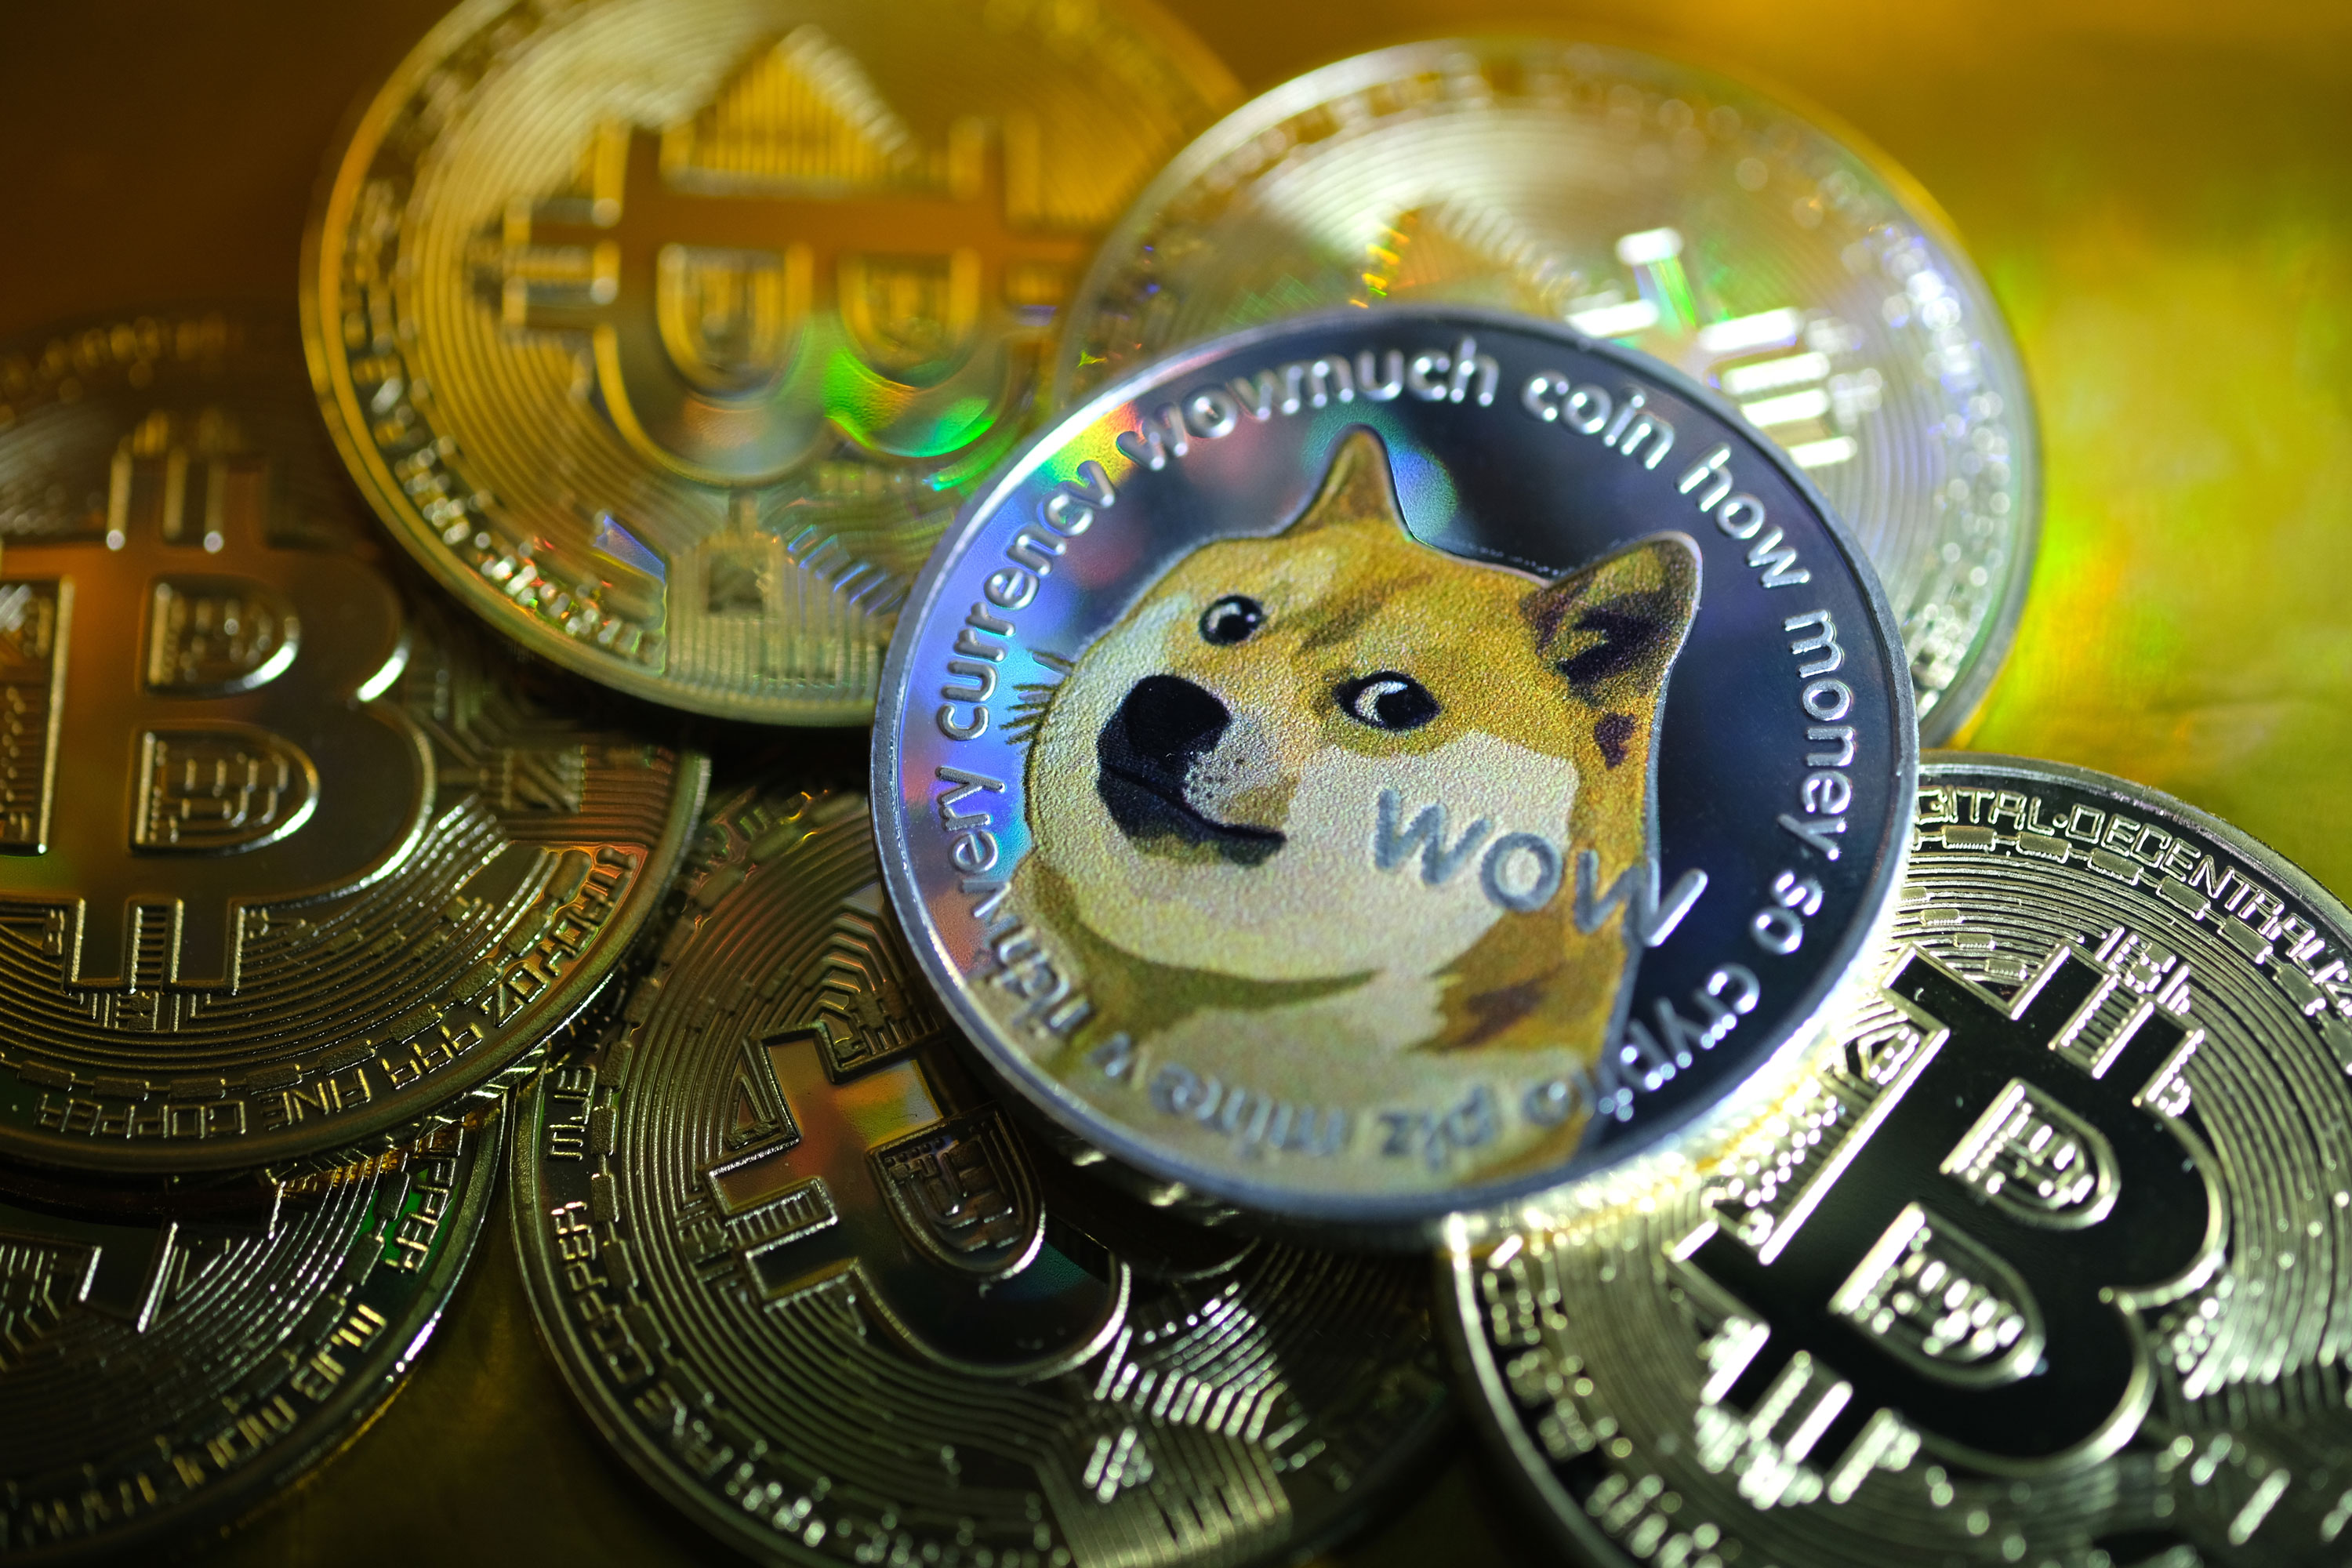 1000 shares of dogecoin worth